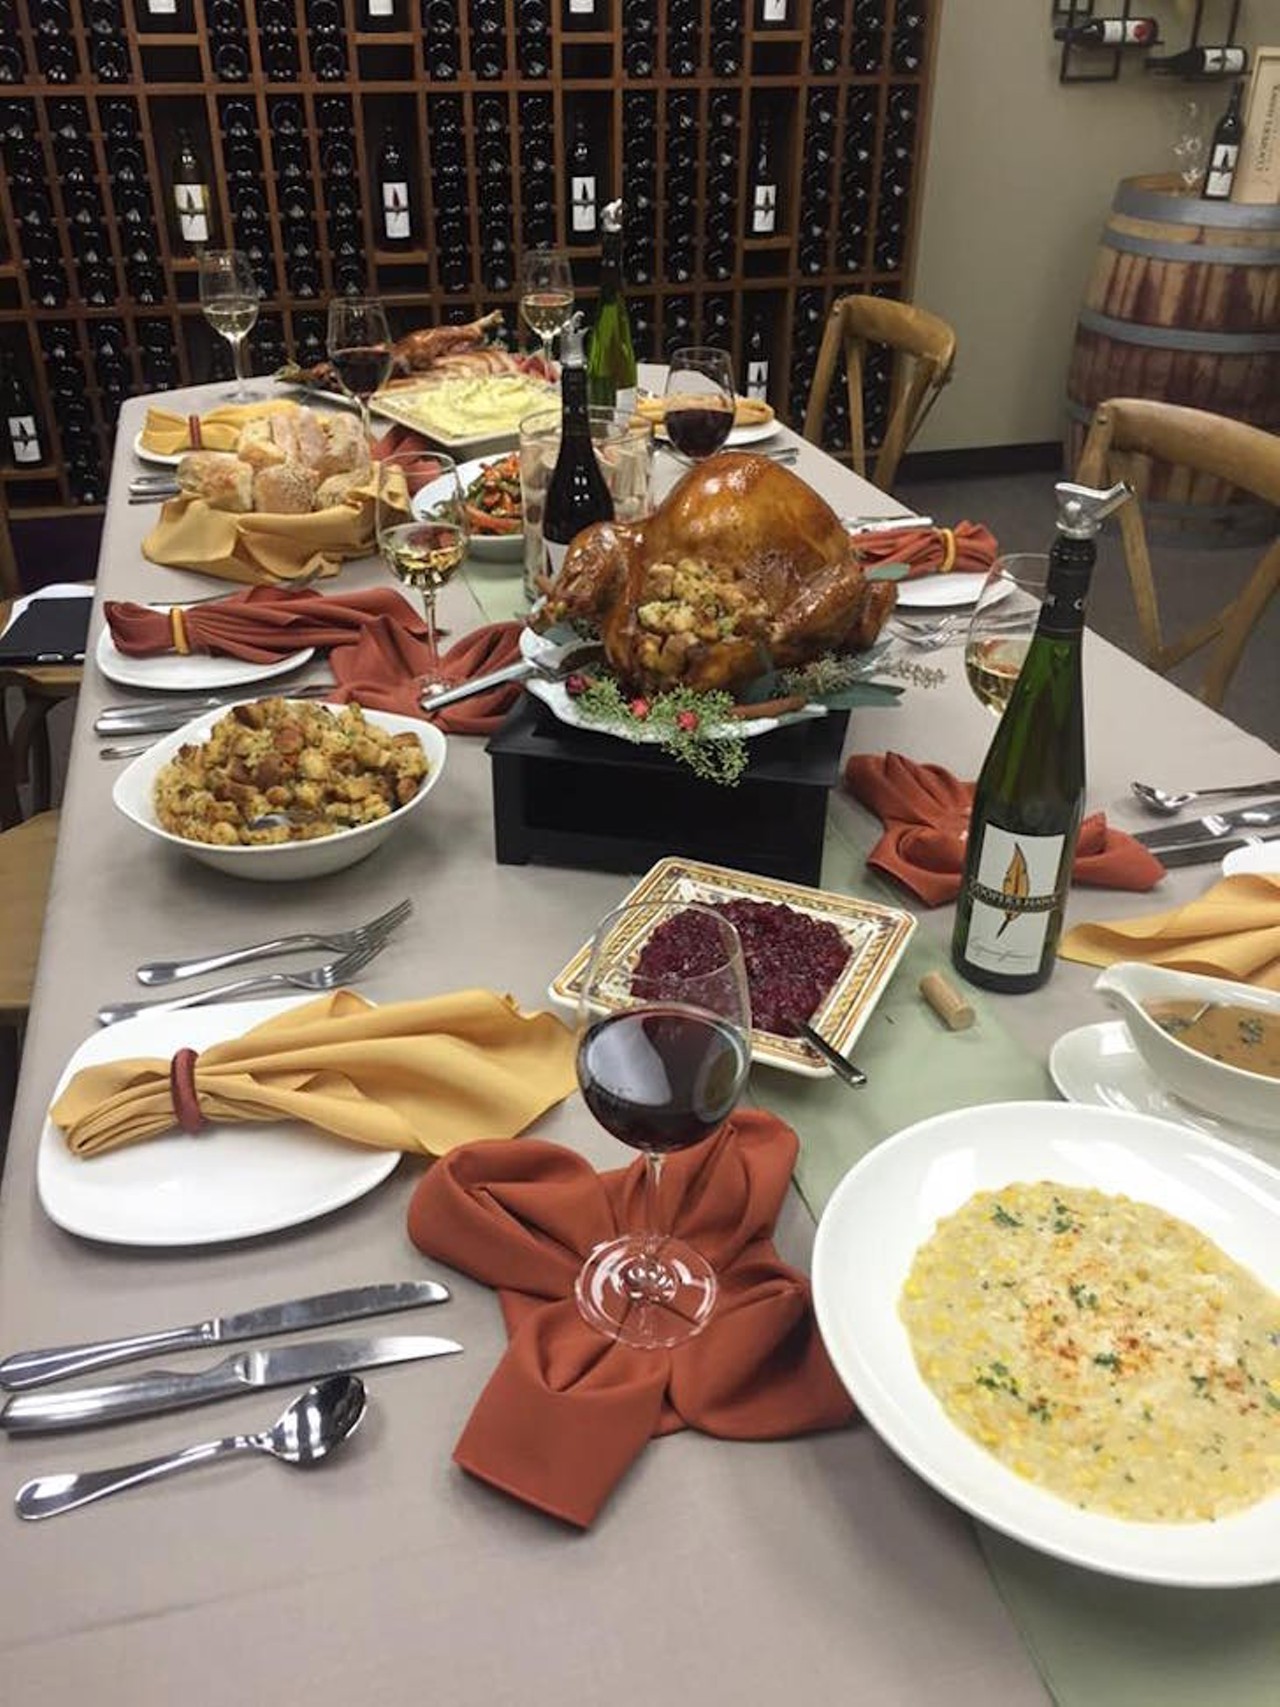 Cooper&#146;s Hawk Winery 
529 N. Alafaya Trail & 8005 International Drive | Alafaya: 407-374-2464 & International: 407-956-3400
Diners at either of Cooper&#146;s Hawk&#146;s Orlando locations can partake in traditional thanksgiving dishes such as potatoes, green beans, turkey and stuffing, as well as being able to finish off the meal with a spiced pumpkin cheesecake. Those who think a holiday isn&#146;t complete without  libations can order the citrusy wine of the month or the cranberry sangria. Adults eat for $27.99 and children under 12 eat for $12.99. Alcohol not included.
Photo via Ana Belaval/Facebook